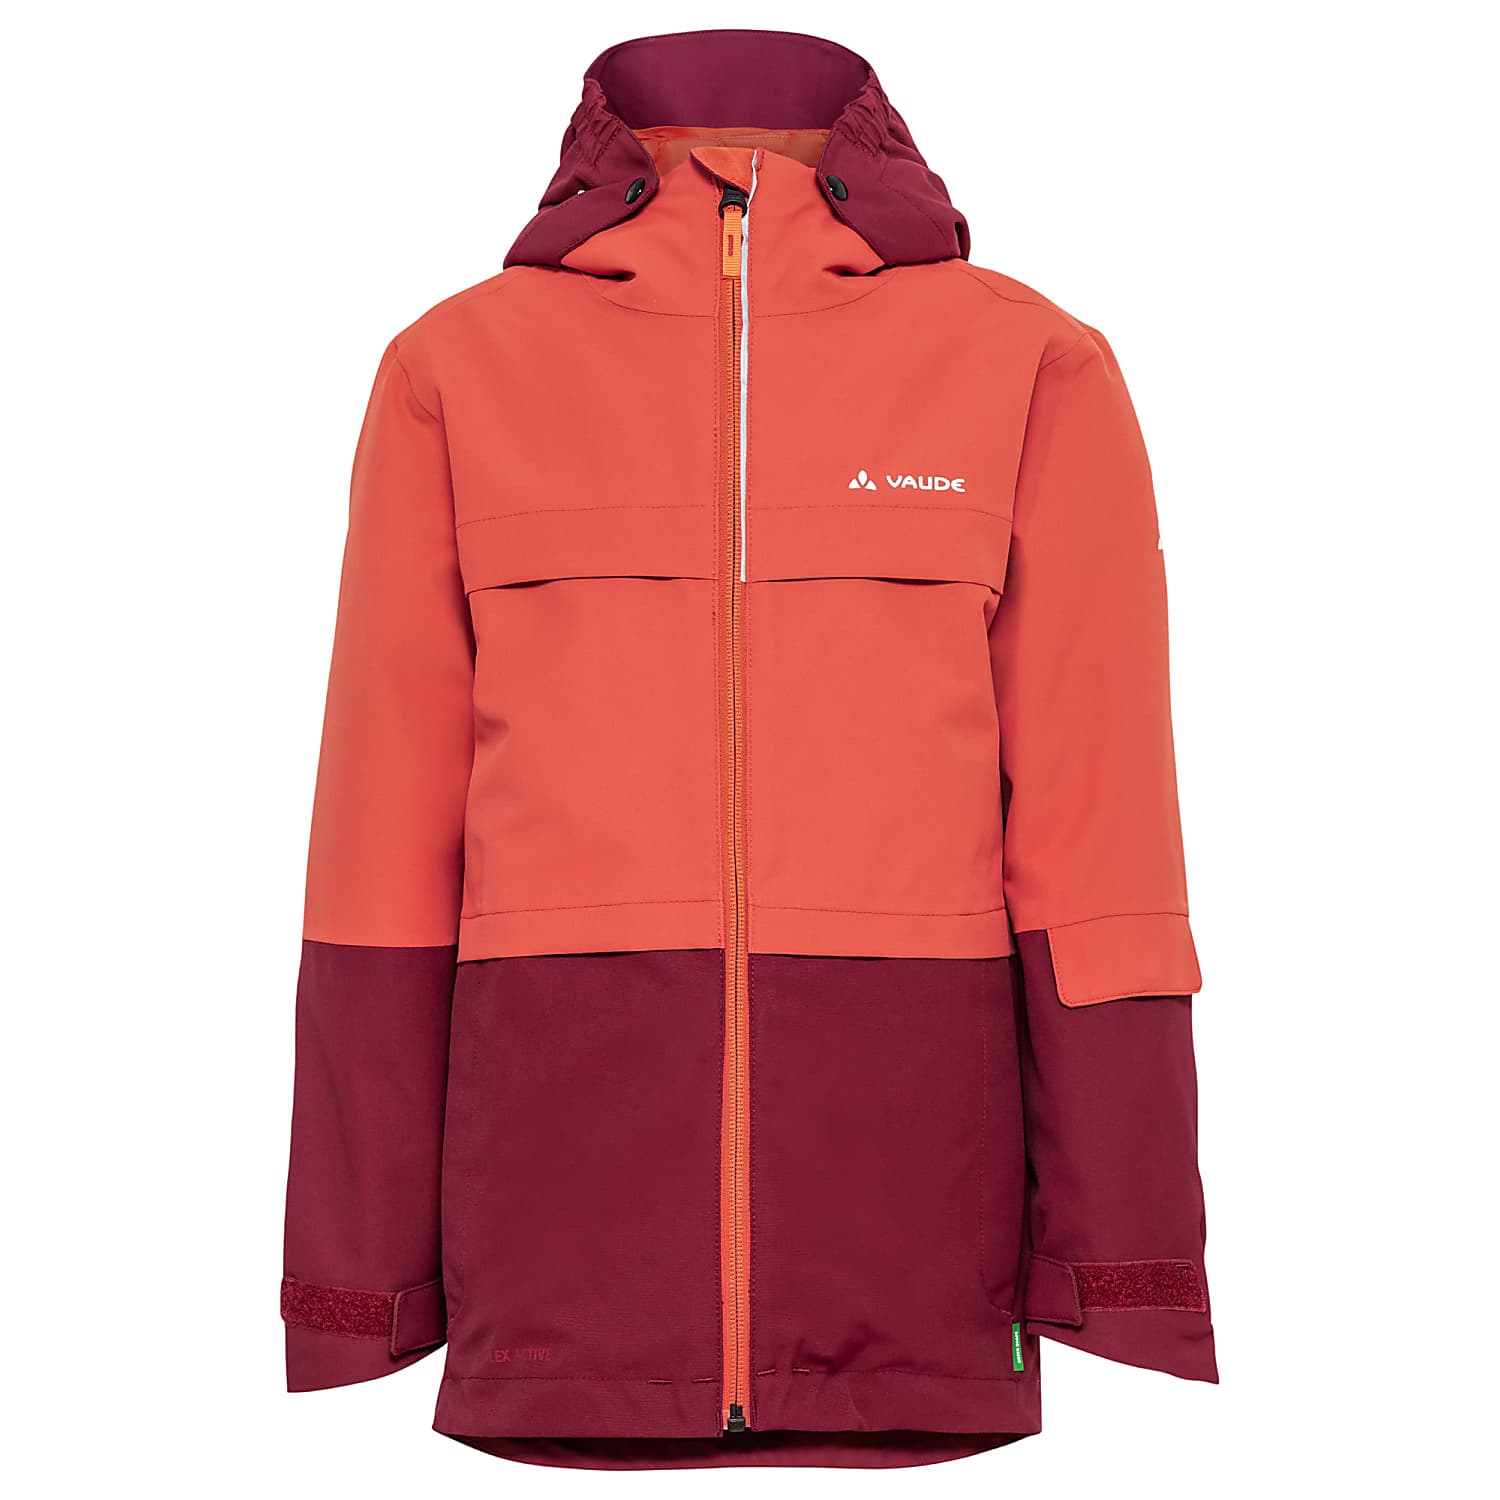 Hot II, SNOW JACKET 3IN1 60£ at CUP Free - starts Chili Vaude KIDS Shipping